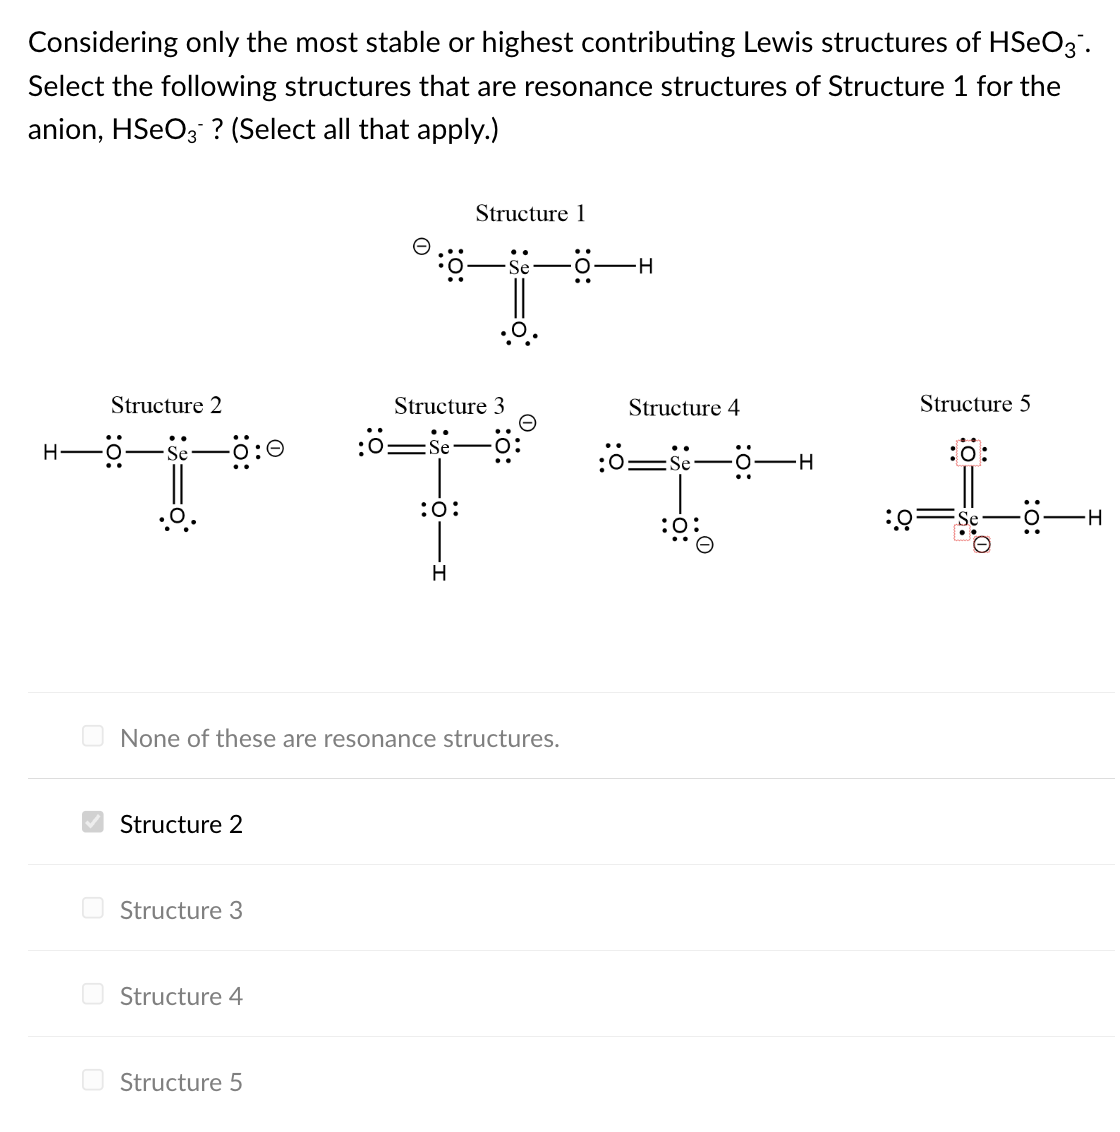 Considering only the most stable or highest contributing Lewis structures of HSeO3.
Select the following structures that are resonance structures of Structure 1 for the
anion, HSeO3? (Select all that apply.)
H
Structure 2
-Ö—Se—0:0
Structure 3
:0-Se-0:
:0-Se-0-
TTII
Structure 2
Structure 3
None of these are resonance structures.
Structure 4
Structure 1
:6-
Structure 5
H
O-H
Structure 4
Structure 5
H